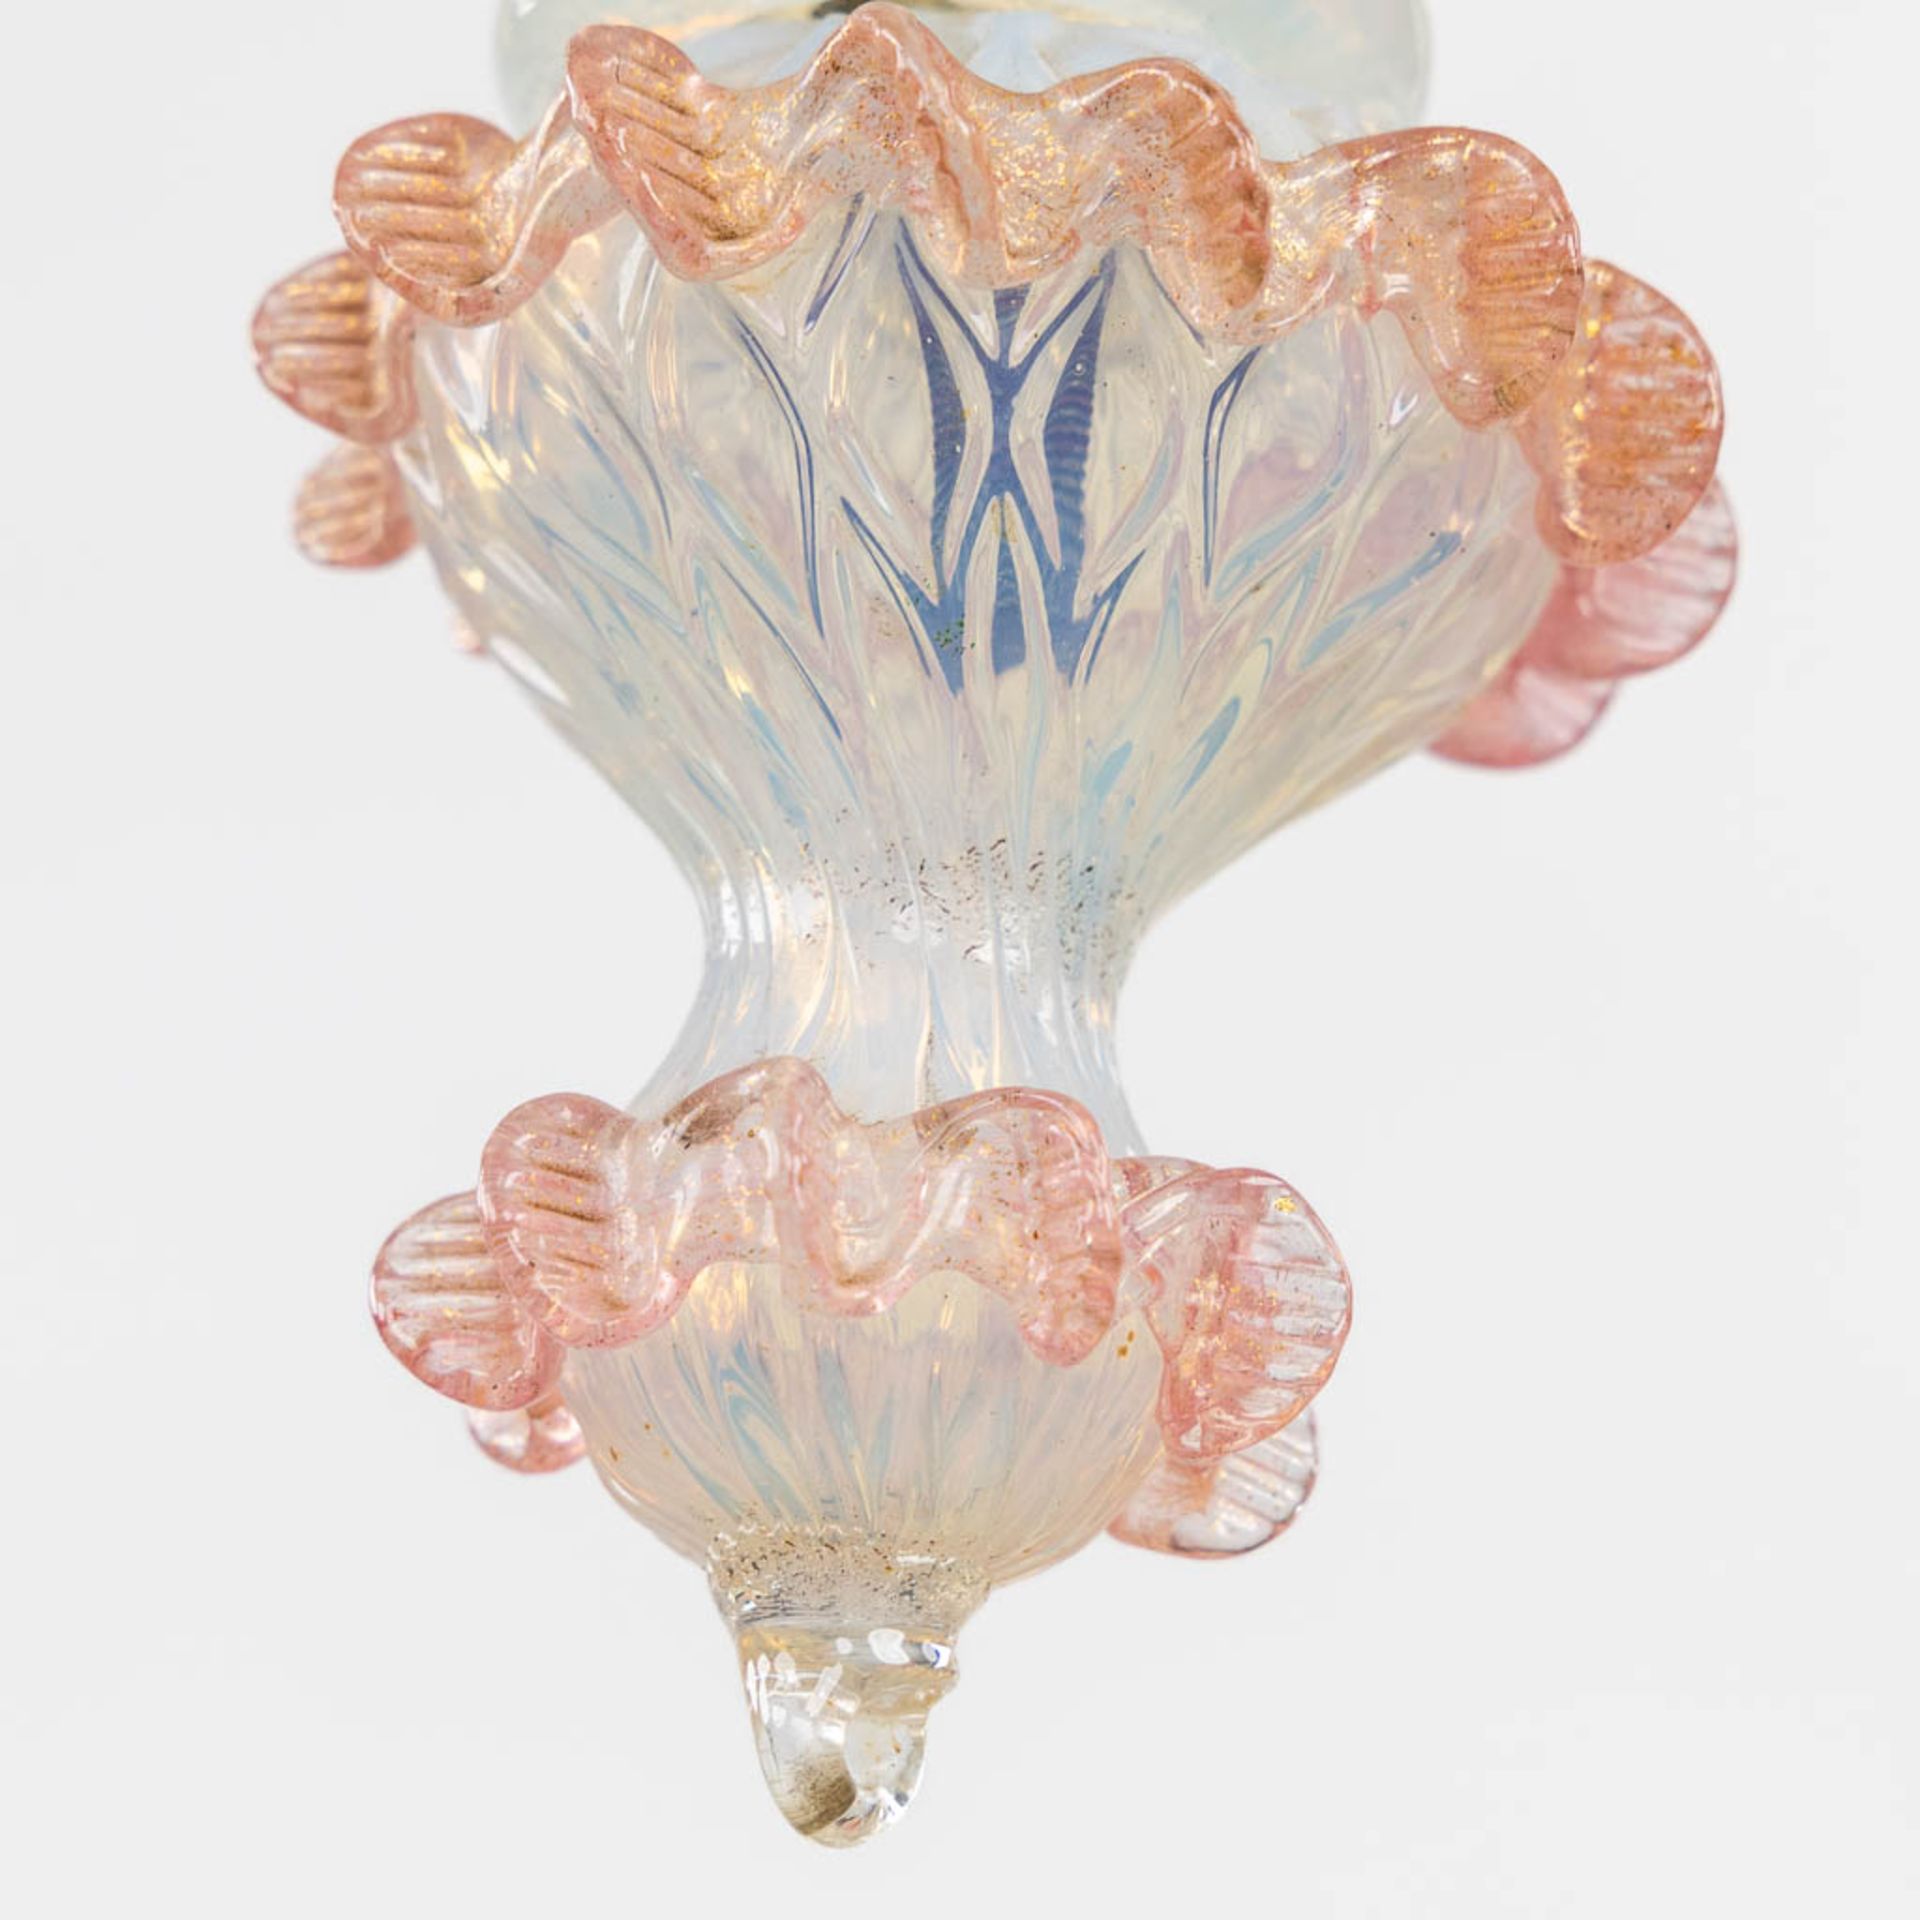 A decorative Venetian glass chandelier, red and white glass. 20th C. (H:70 x D:54 cm) - Image 10 of 12